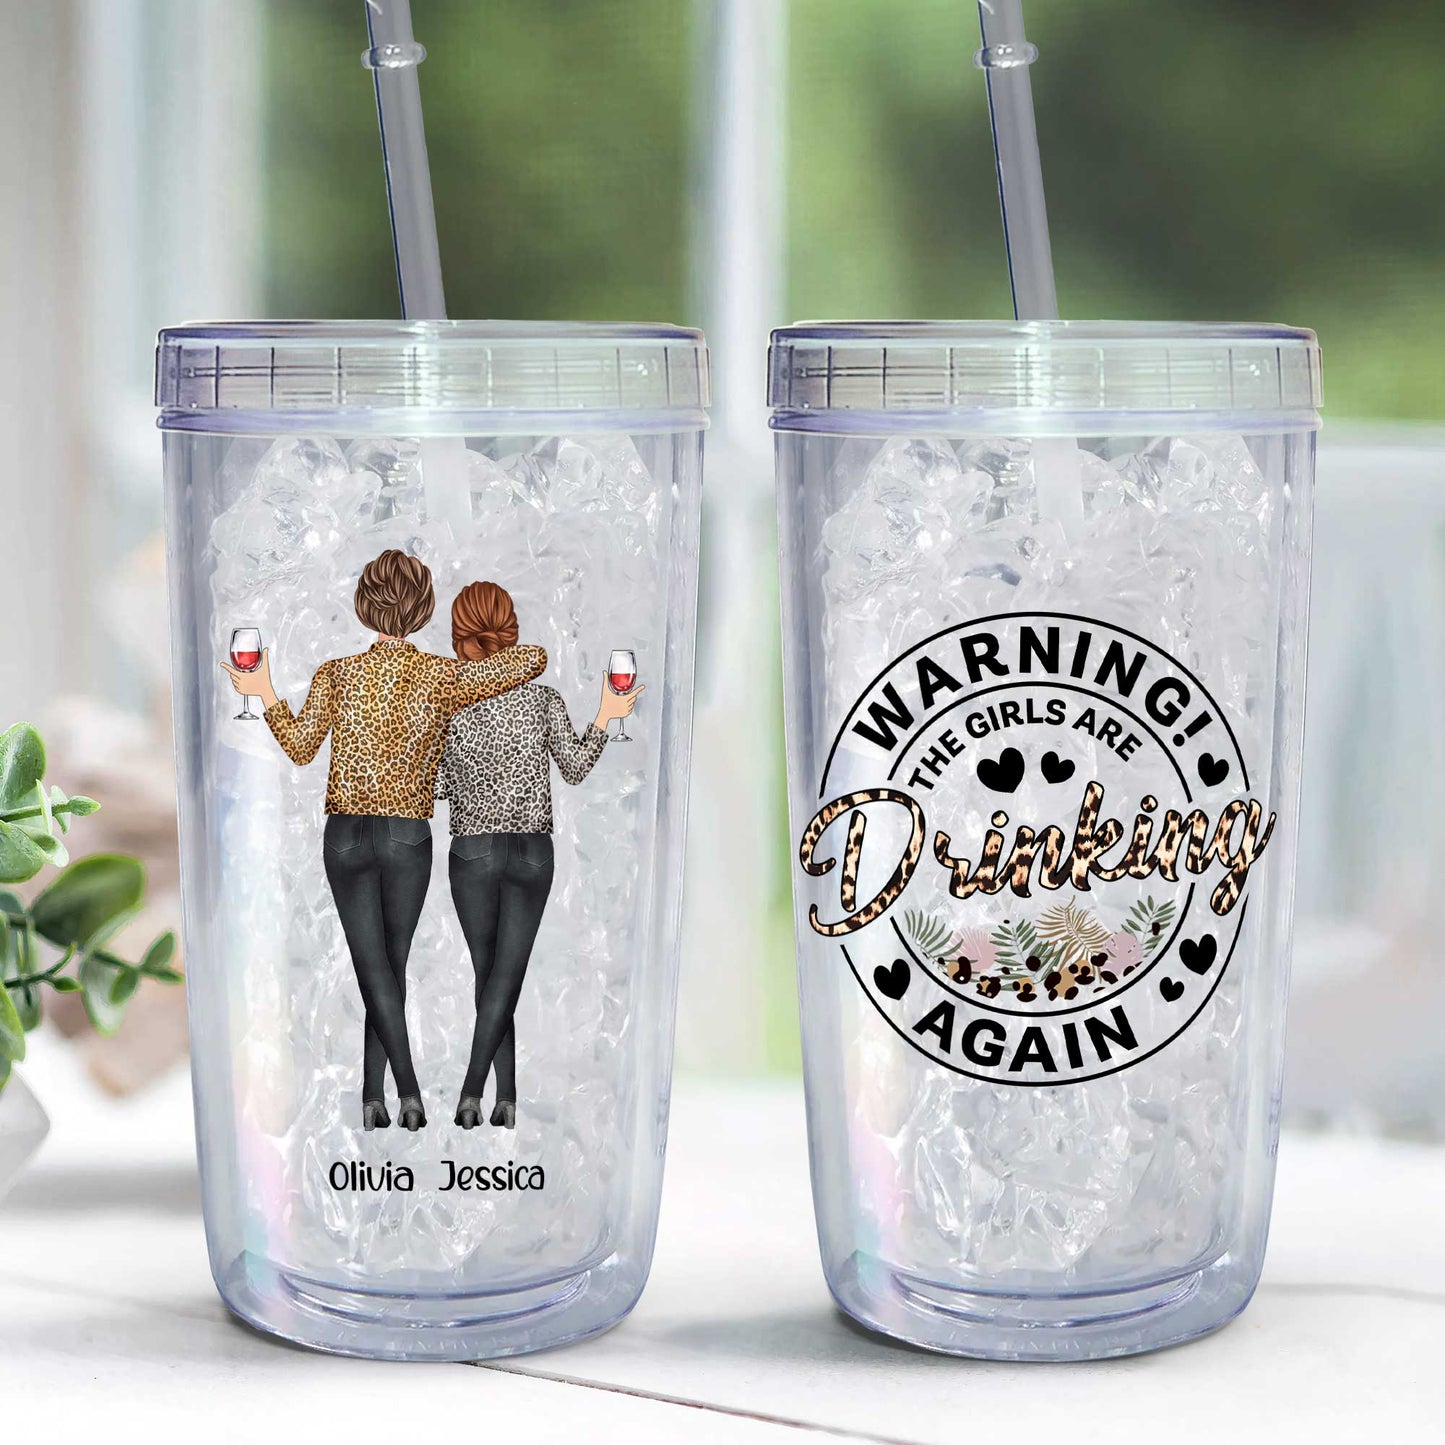 Warning! The Girls Are Drinking Again - Personalized Acrylic Insulated Tumbler